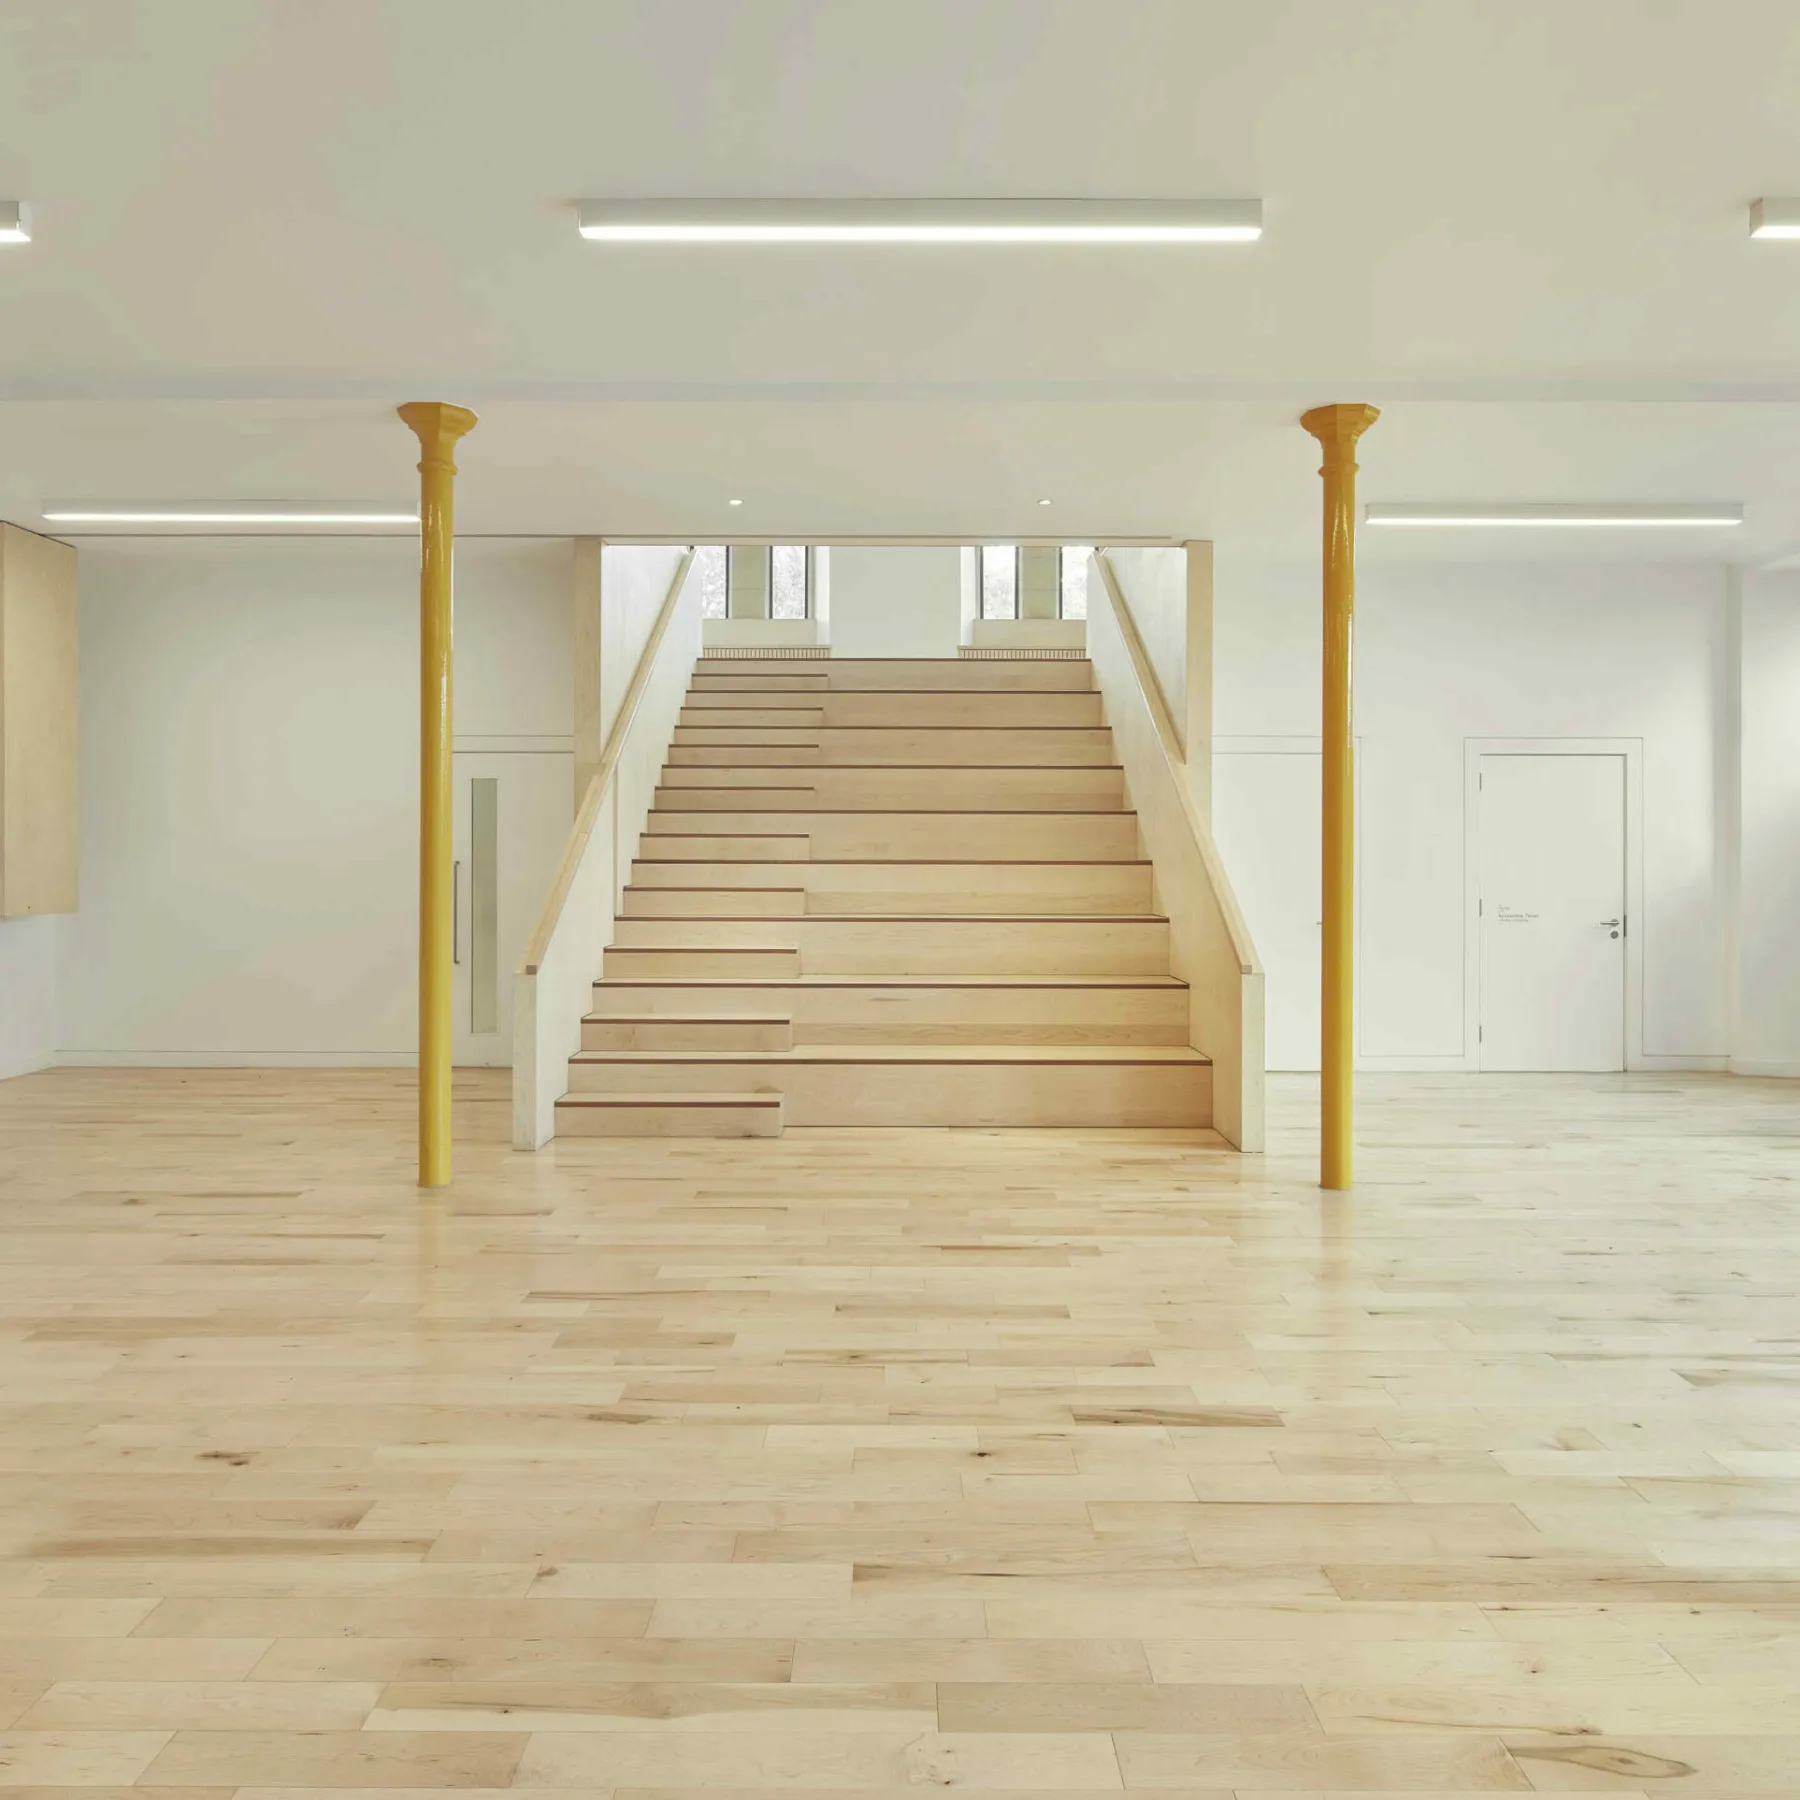 In the undercroft at the Greyfriars Charteris Centre. A flexible and bright space for activities and events in the refurbished and converted former church. Wooden flooring and a wide timber stair case. Original supporting iron columns are painted ochre yellow